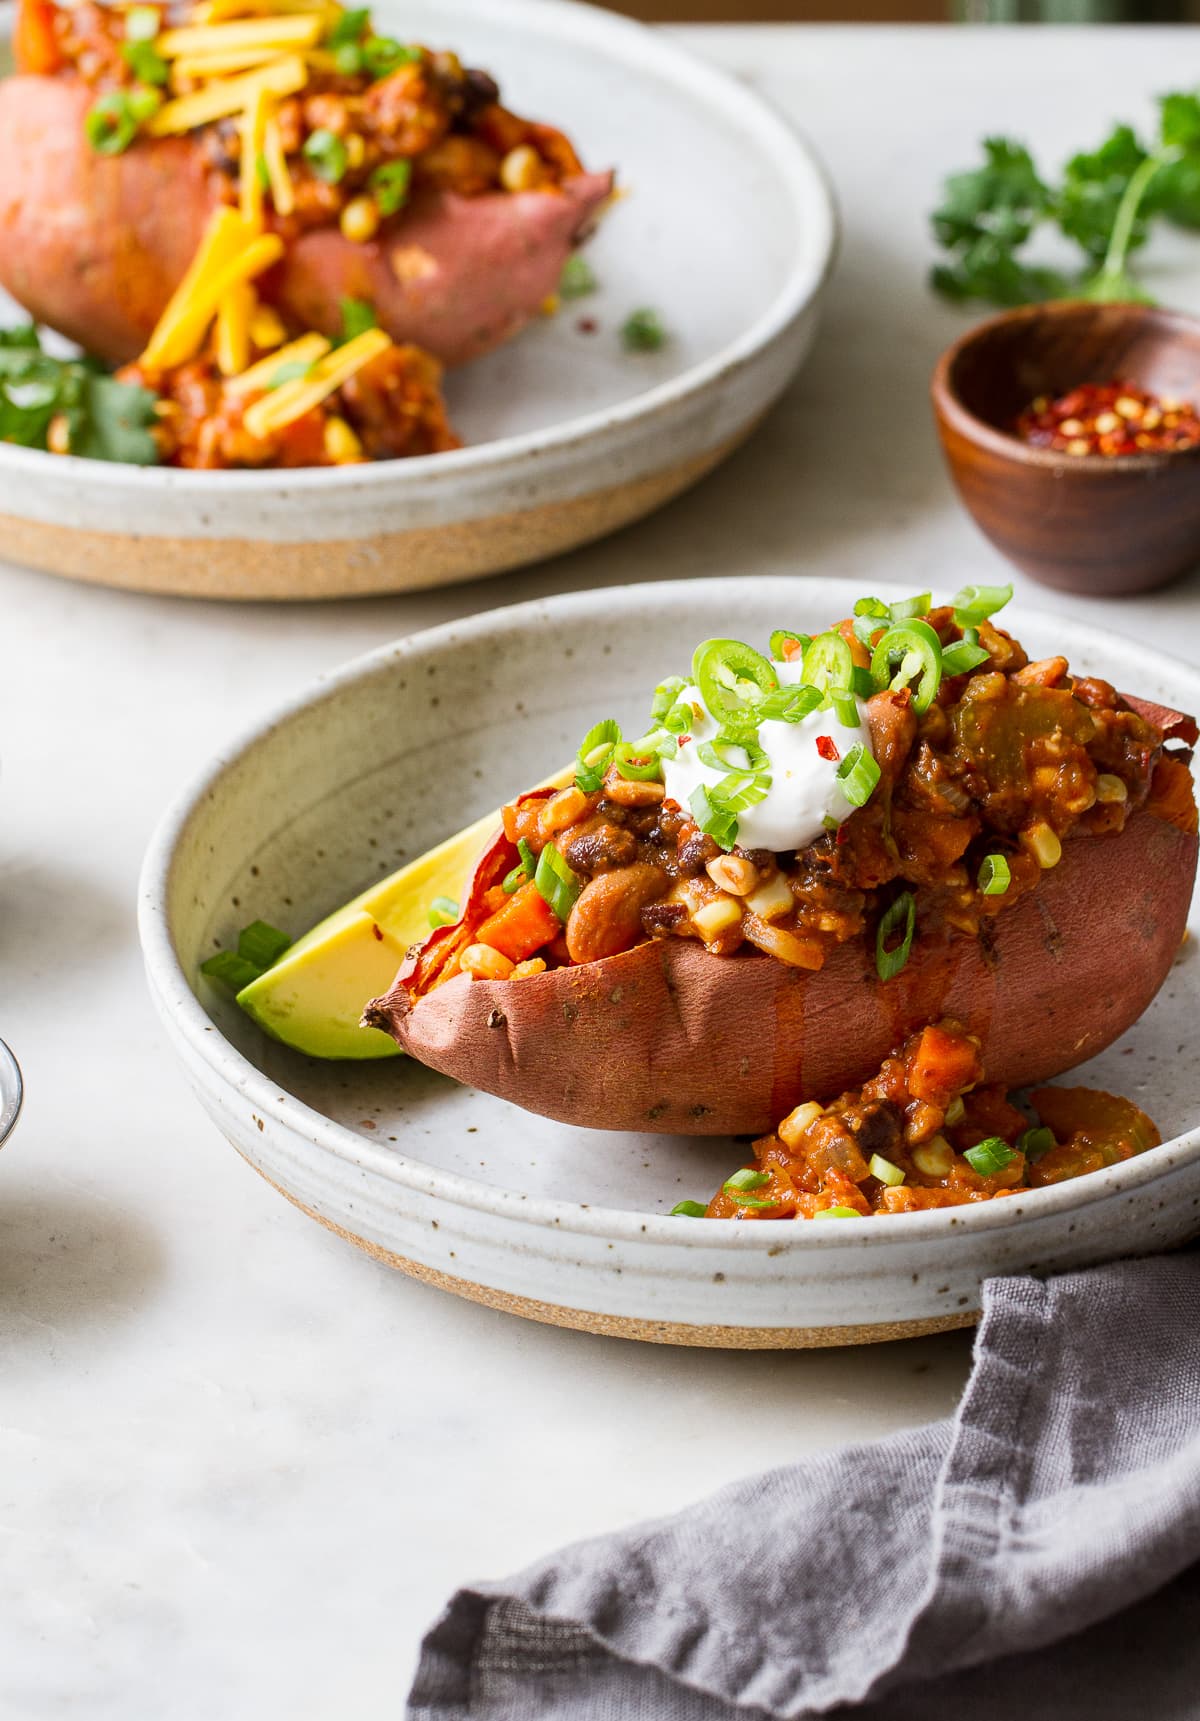 side angle view of chili stuffed sweet potato in a shallow serving bowl.